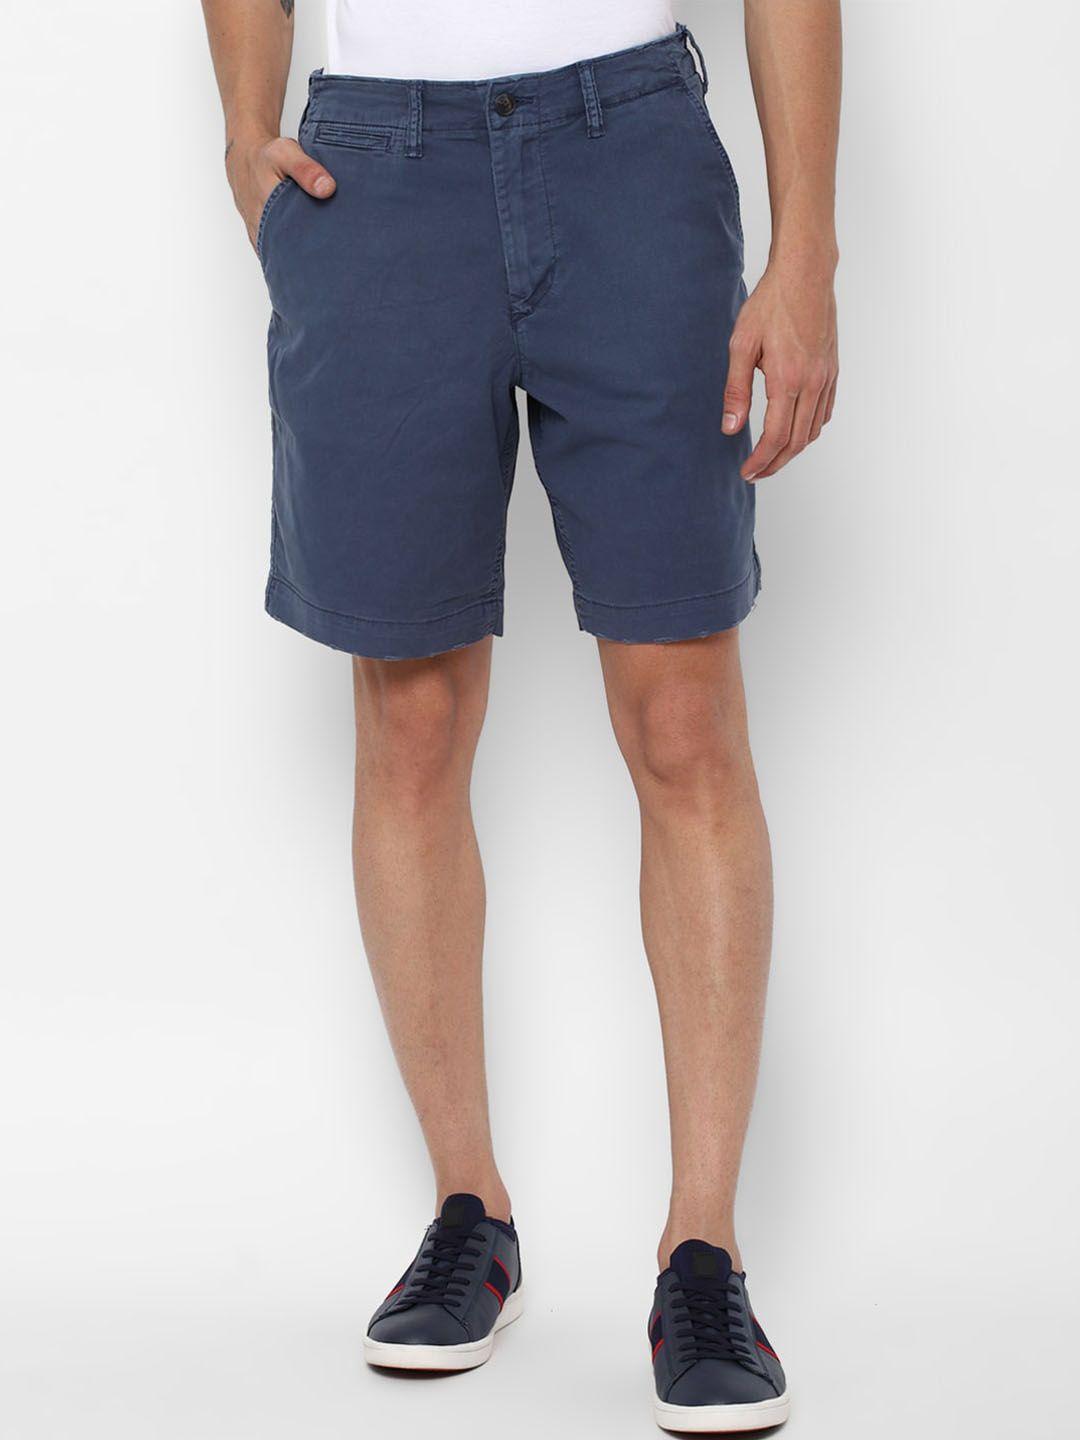 american-eagle-outfitters-men-blue-shorts